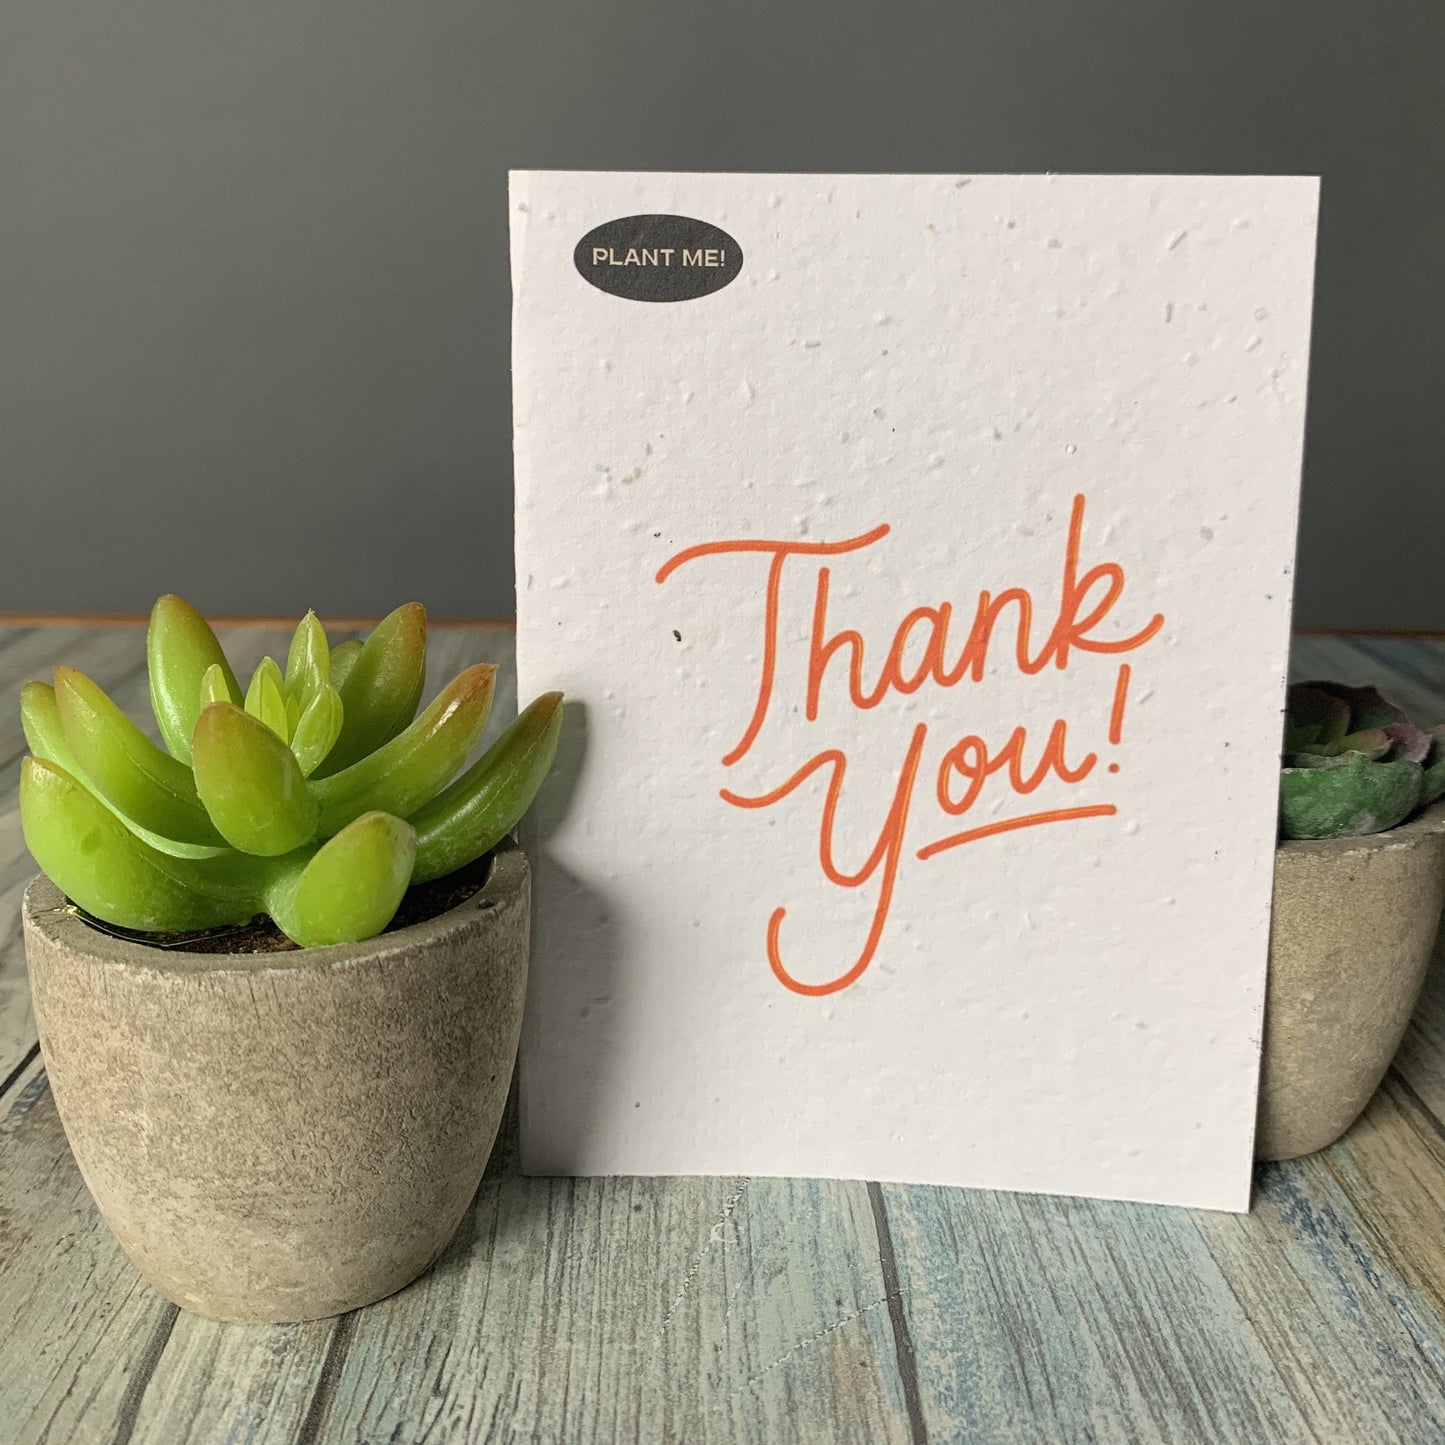 Thank You! Plantable Greeting Card